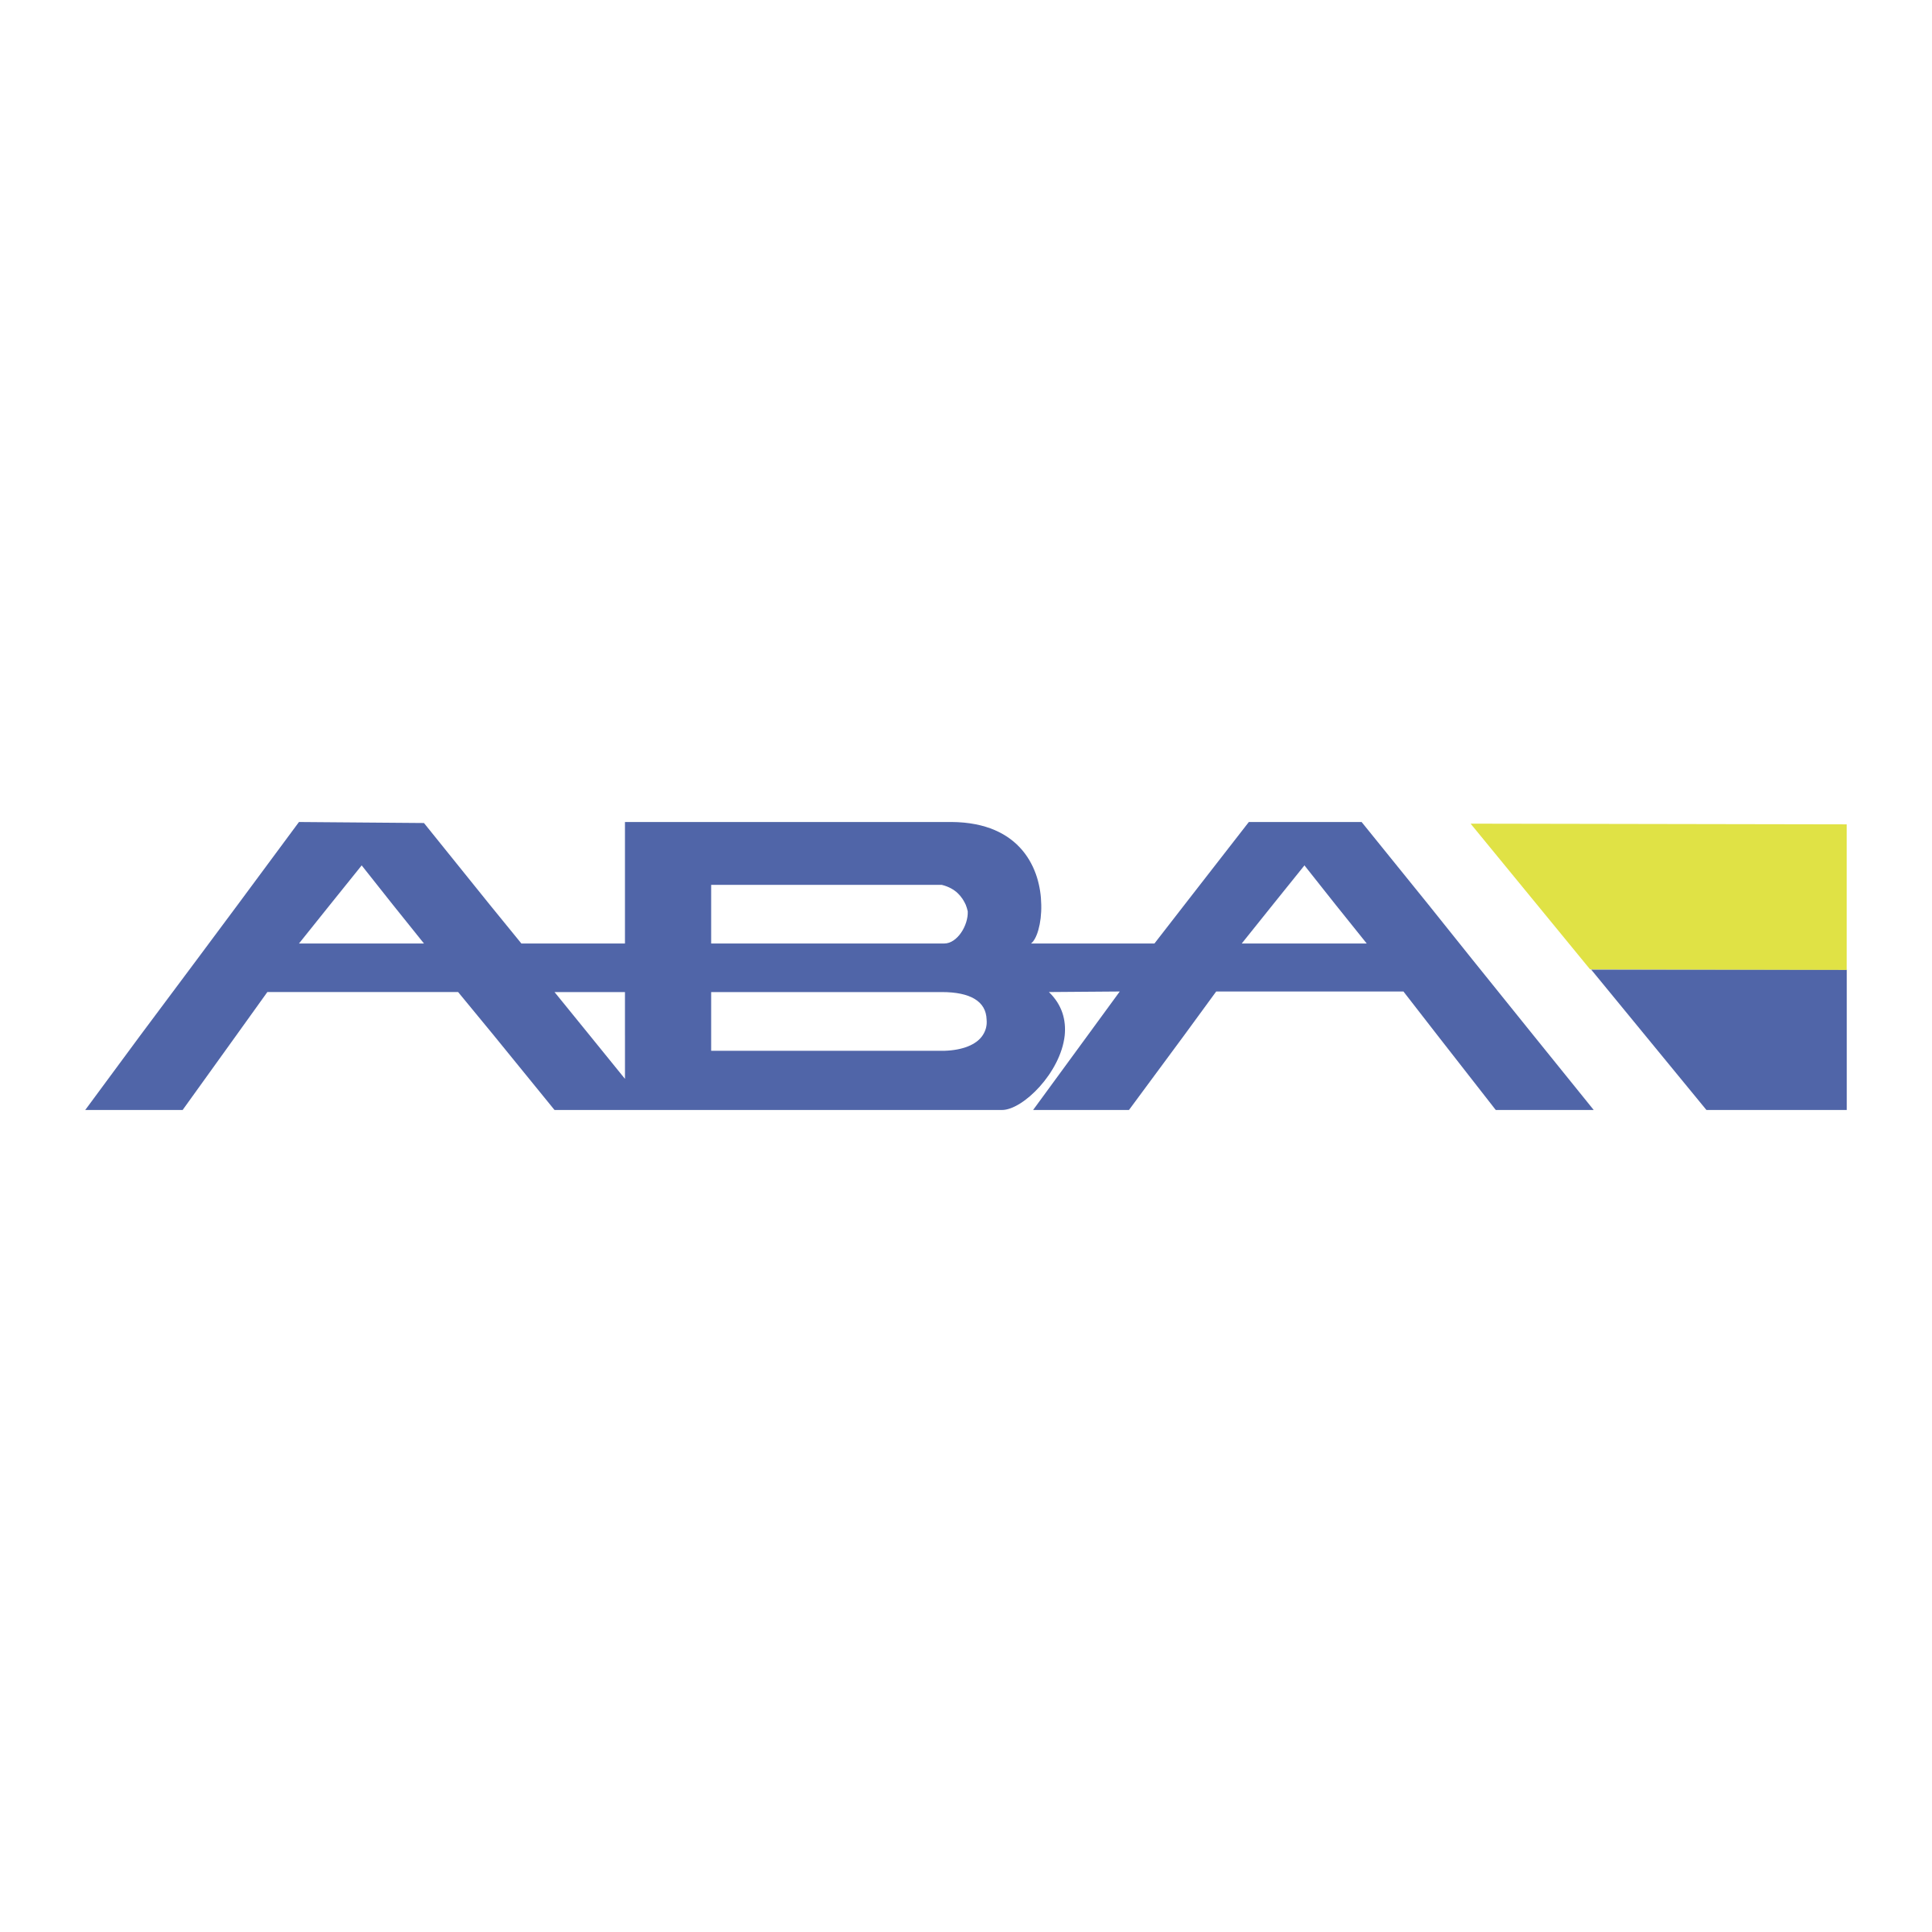 Inspiration Aba Logo Facts Meaning History And Png Logocharts Your 1 Source For Logos 0998